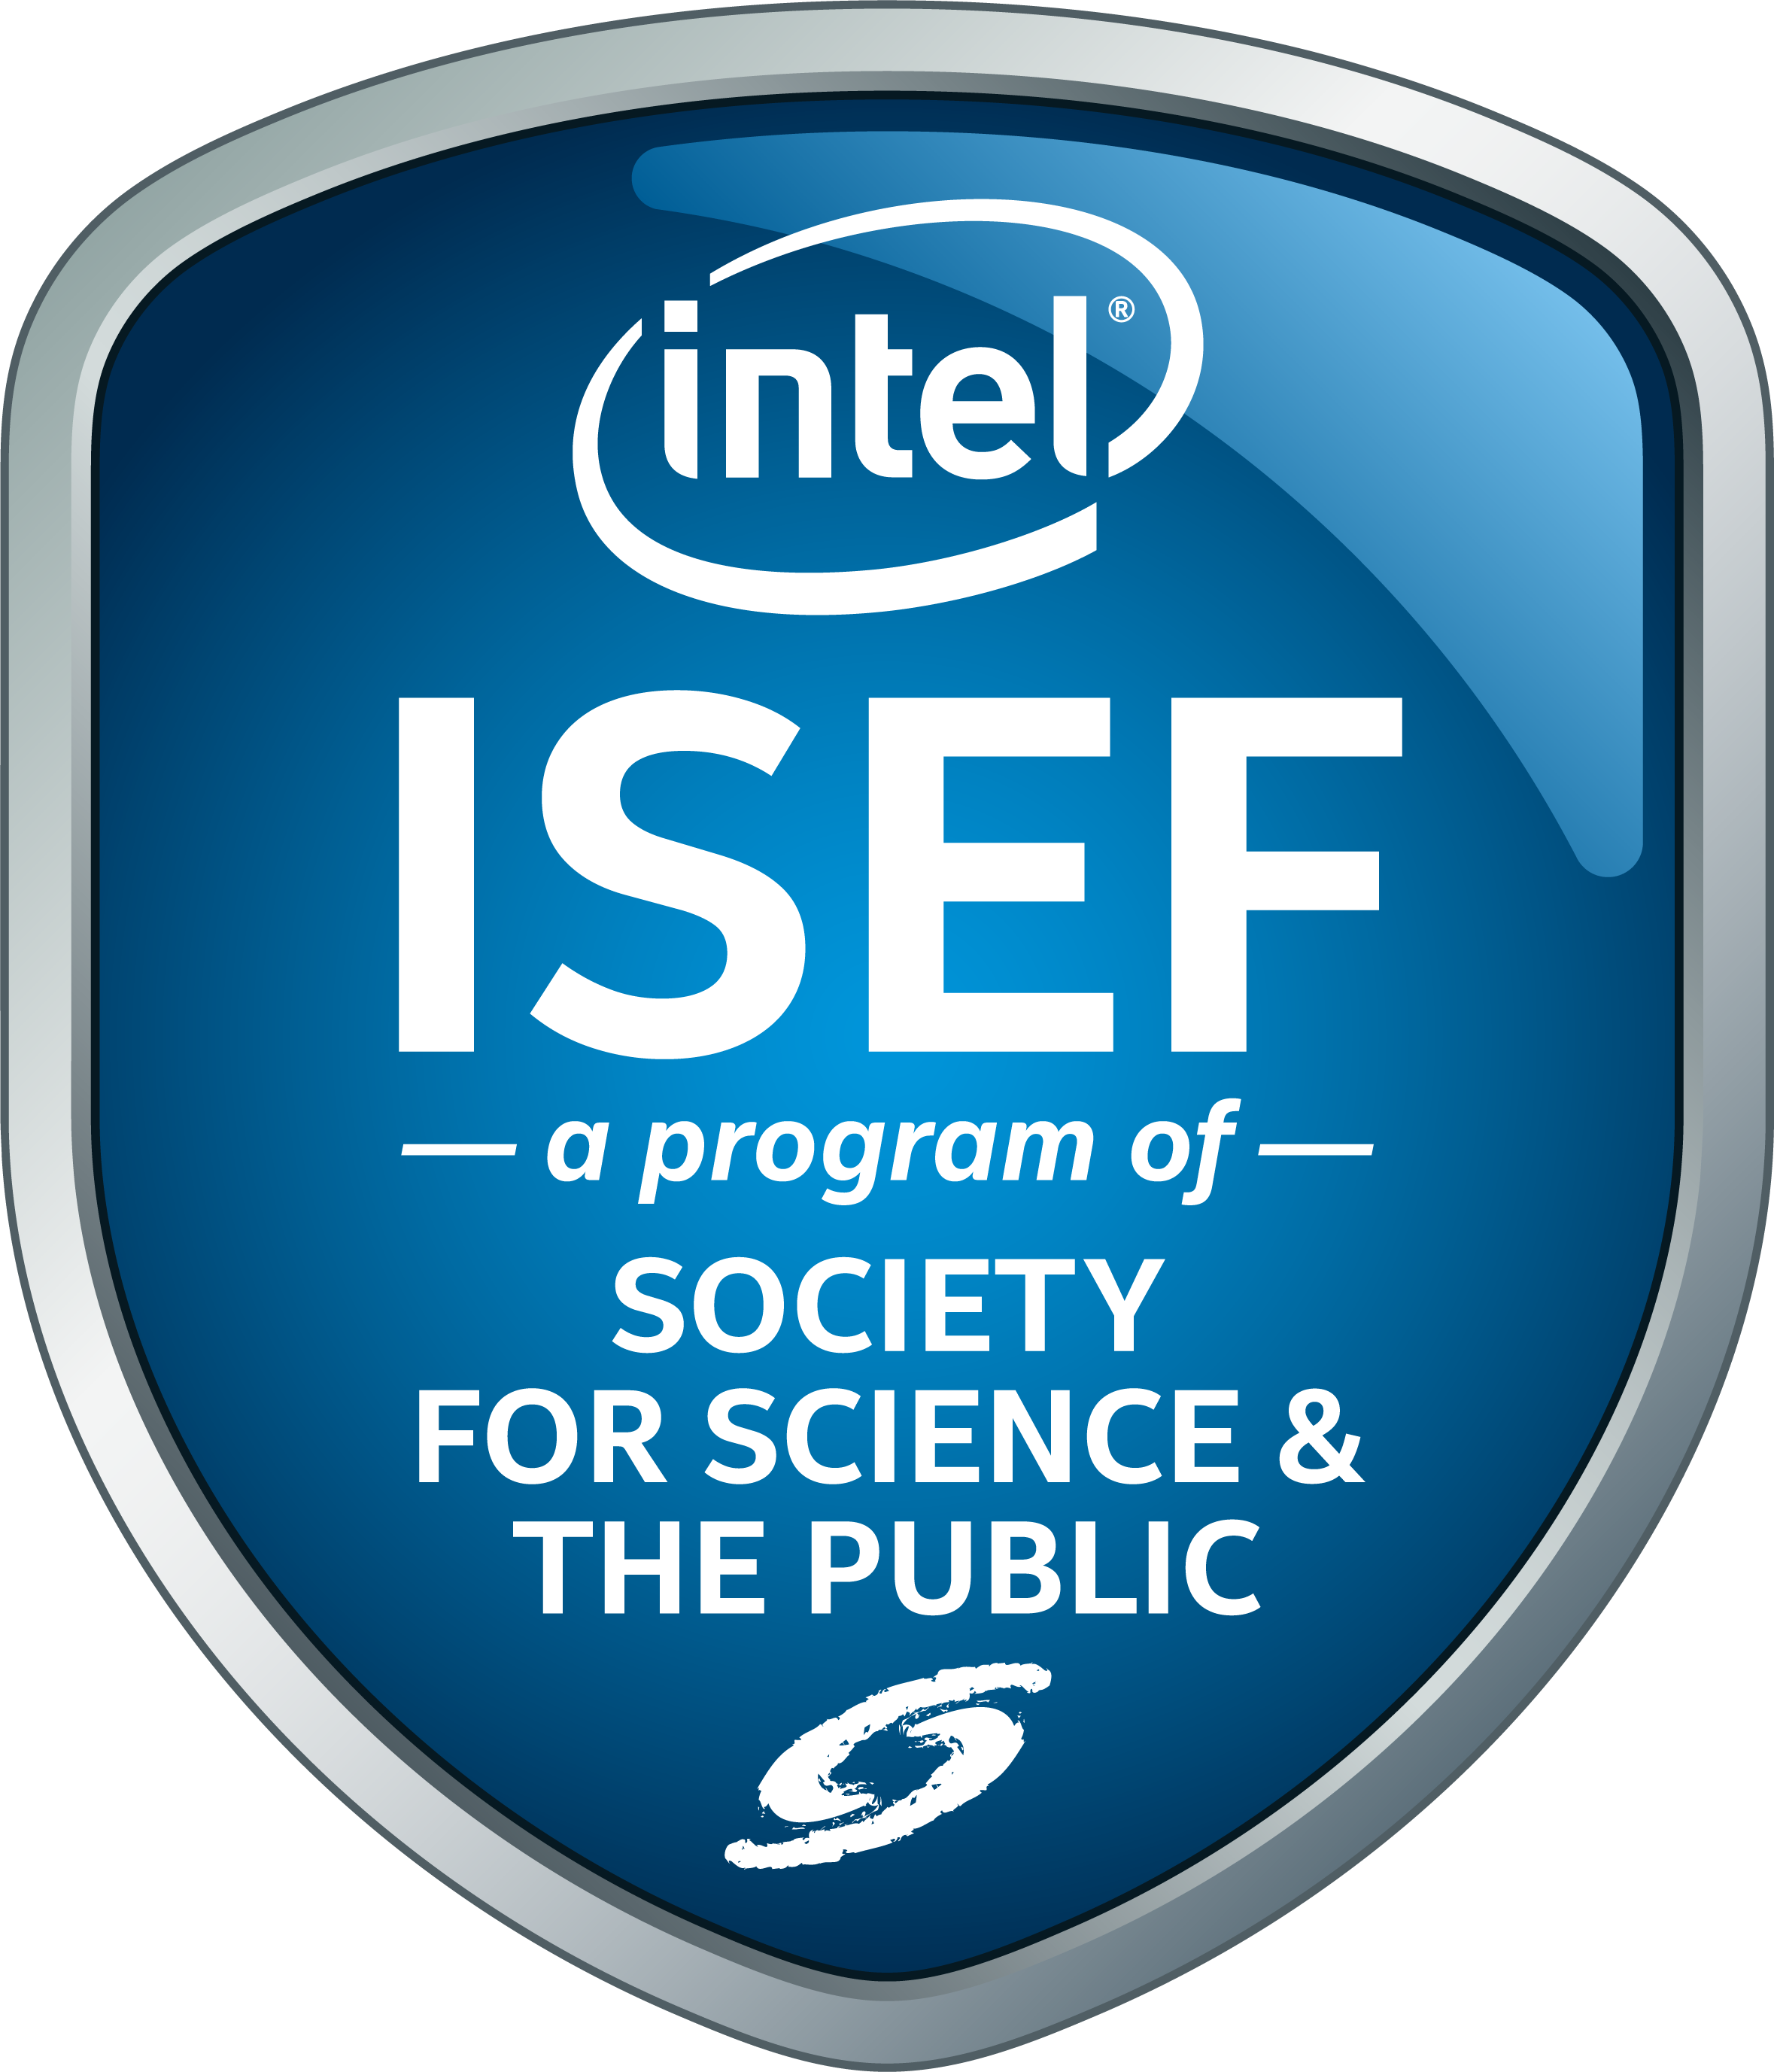 Intel Isef competition